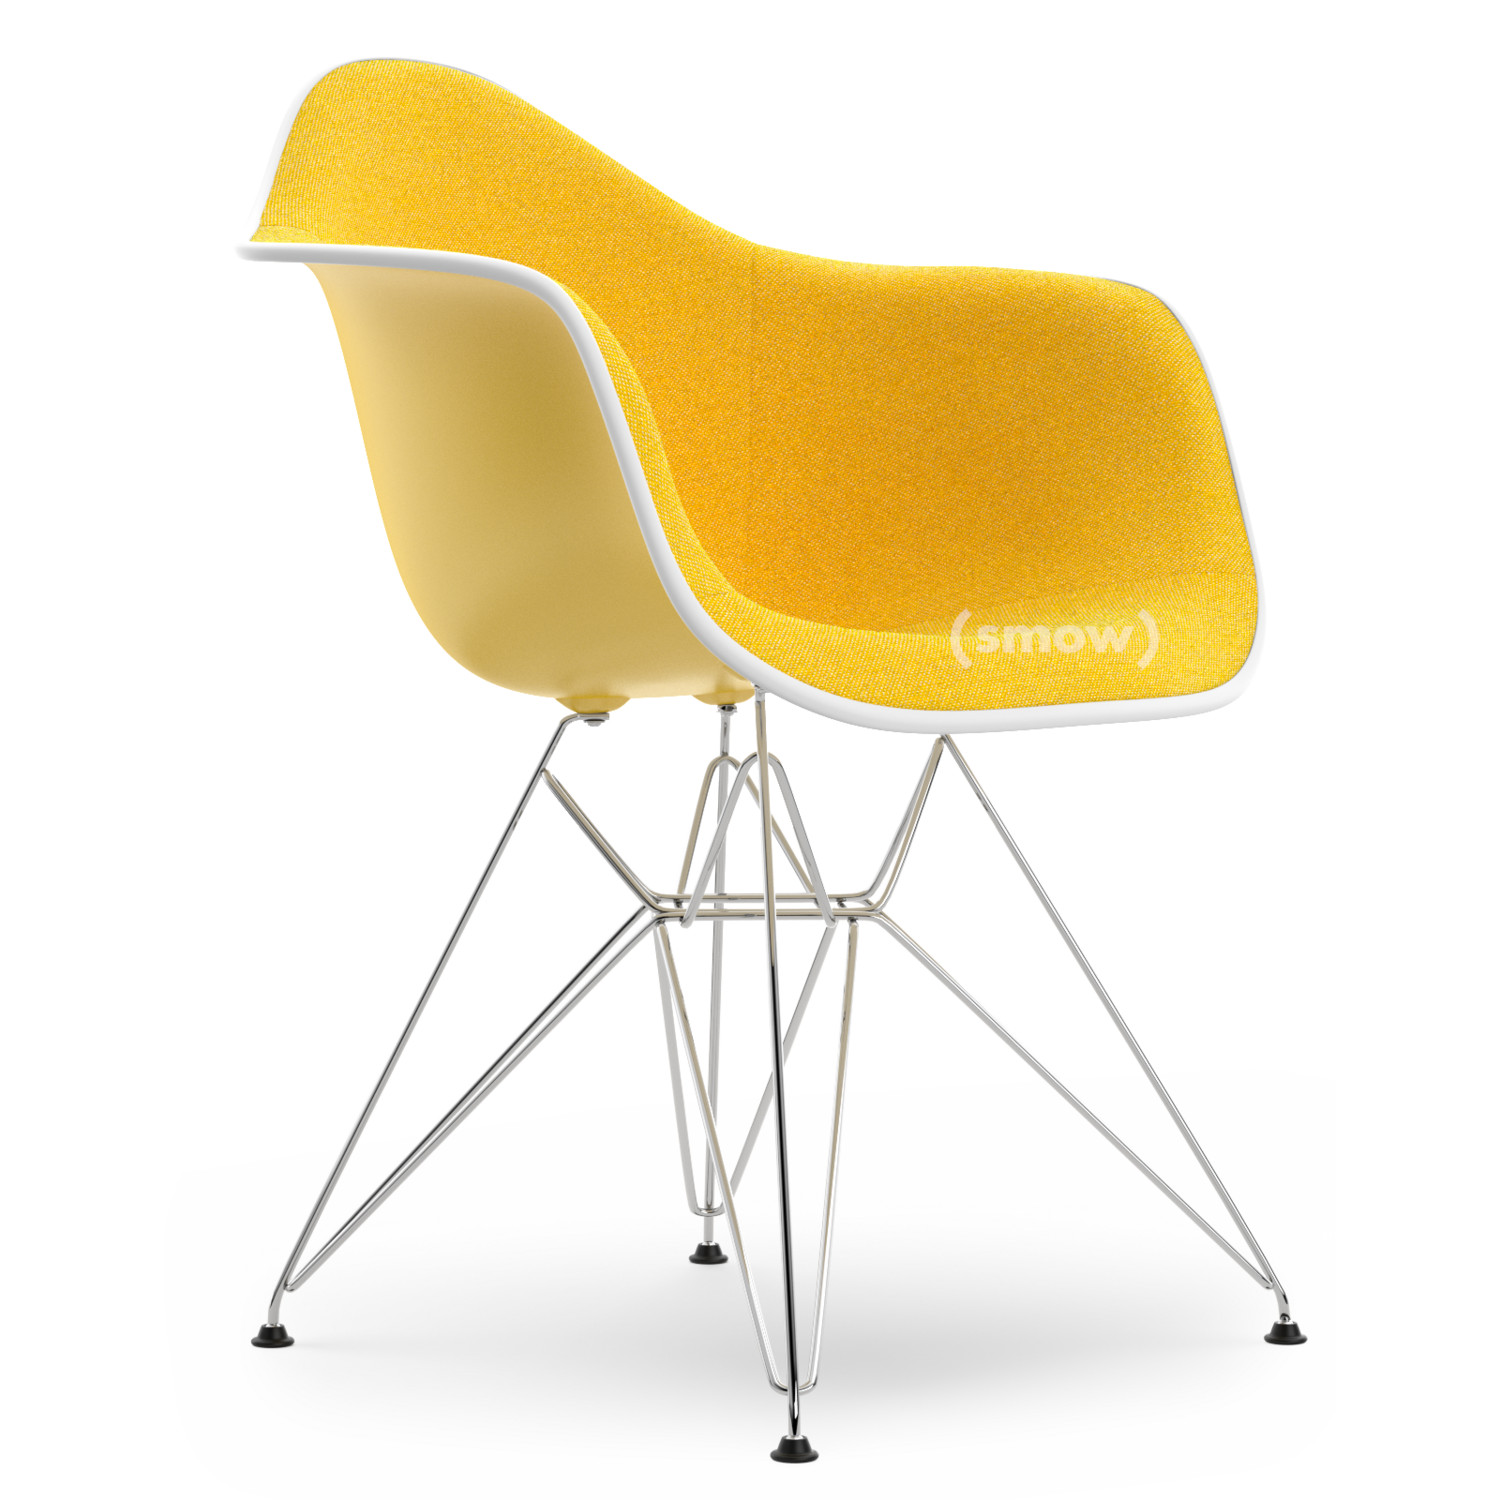 Vitra Eames Plastic Armchair DAR, Sunlight, With full upholstery, Yellow / version - 43 by Charles & Ray Eames, 1950 - Designer furniture by smow.com